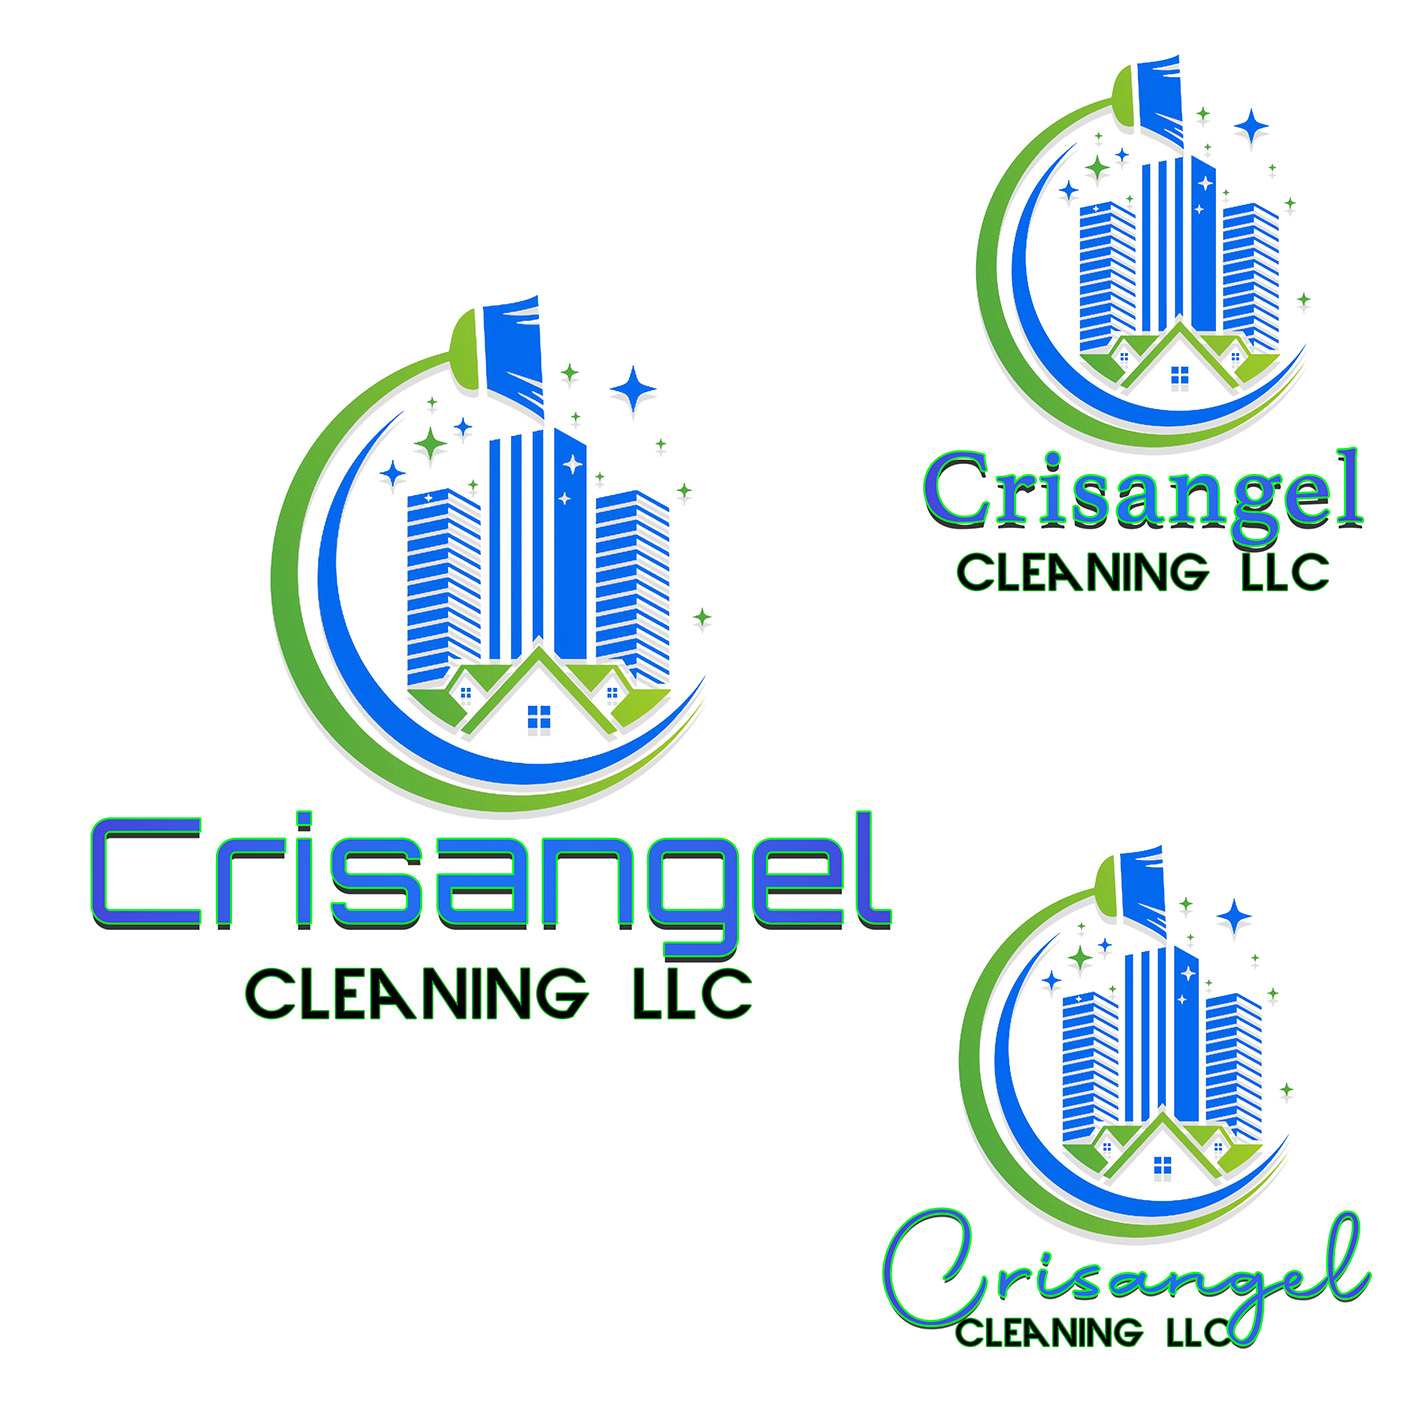 Crisangel Cleaning LLC logo-Recovered